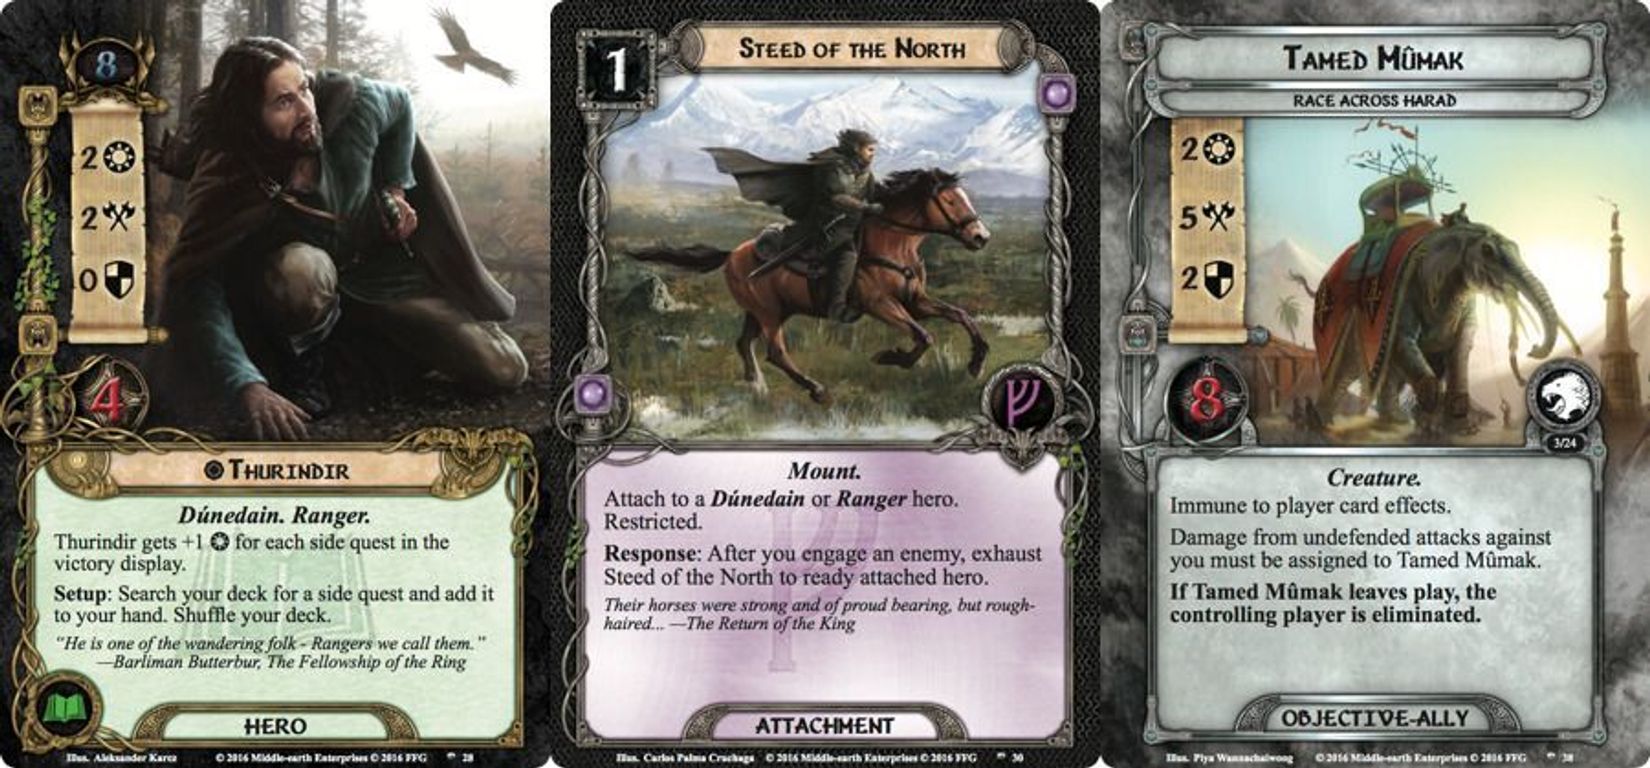 The Lord of the Rings: The Card Game - Race Across Harad cards